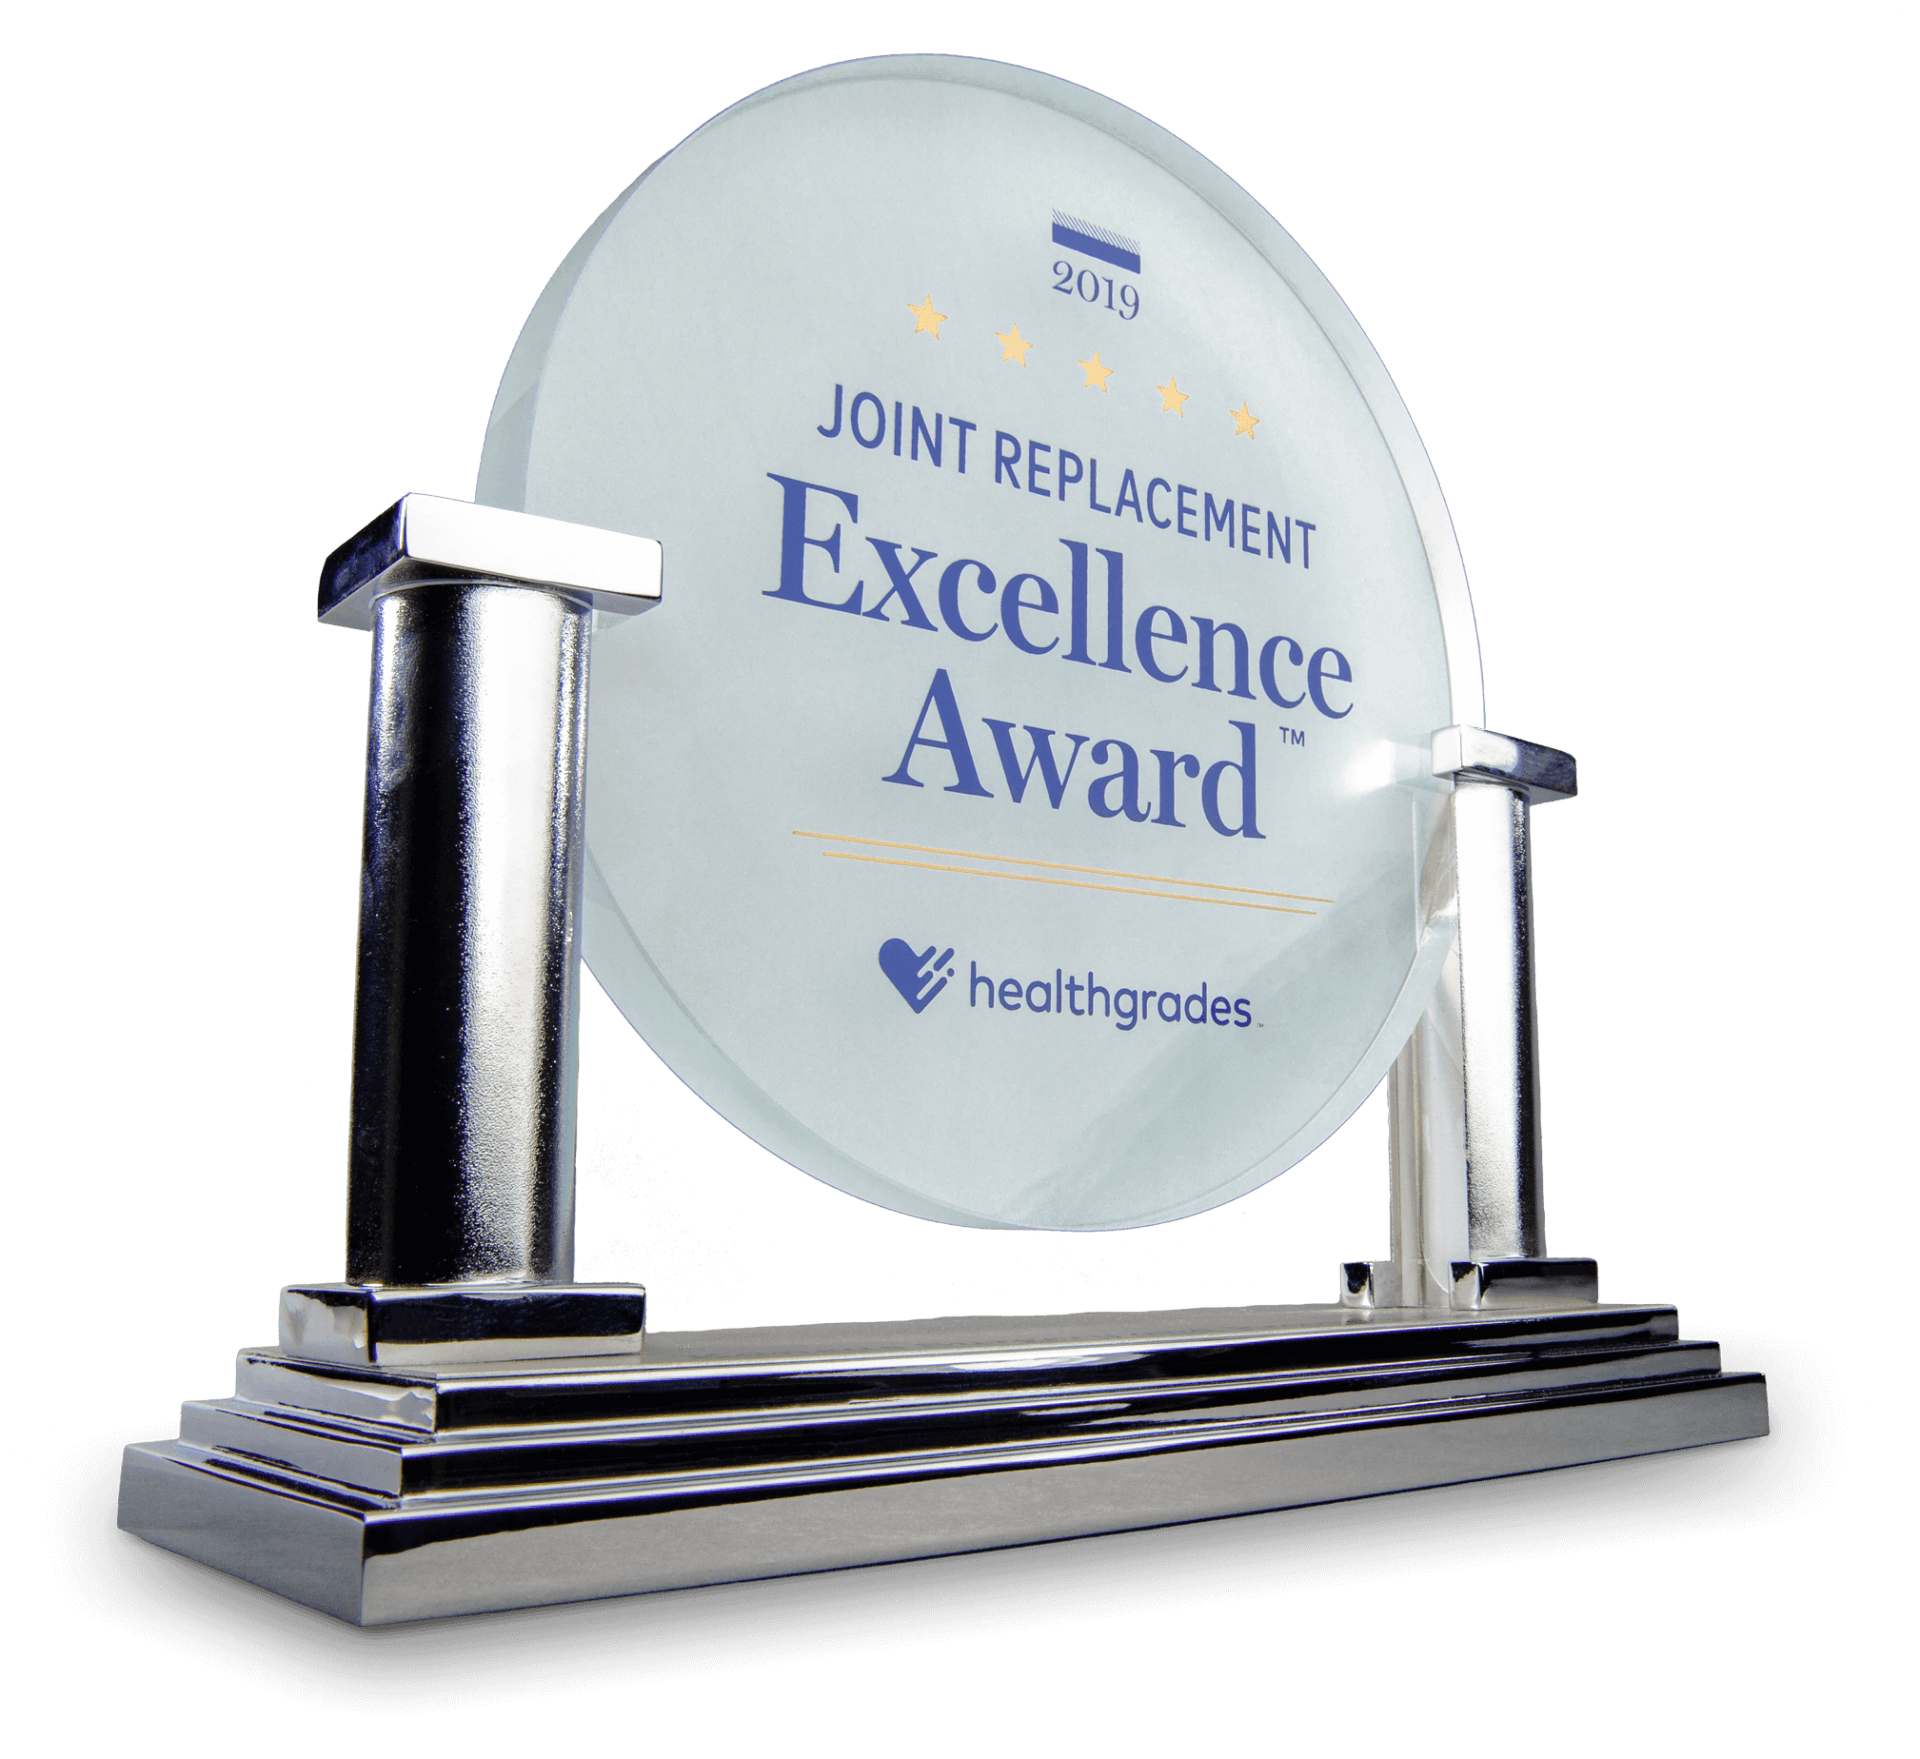 Kansas Surgery and Recovery Center's Joint Replacement Excellence Award was given by Healthgrades for twenty-nineteen